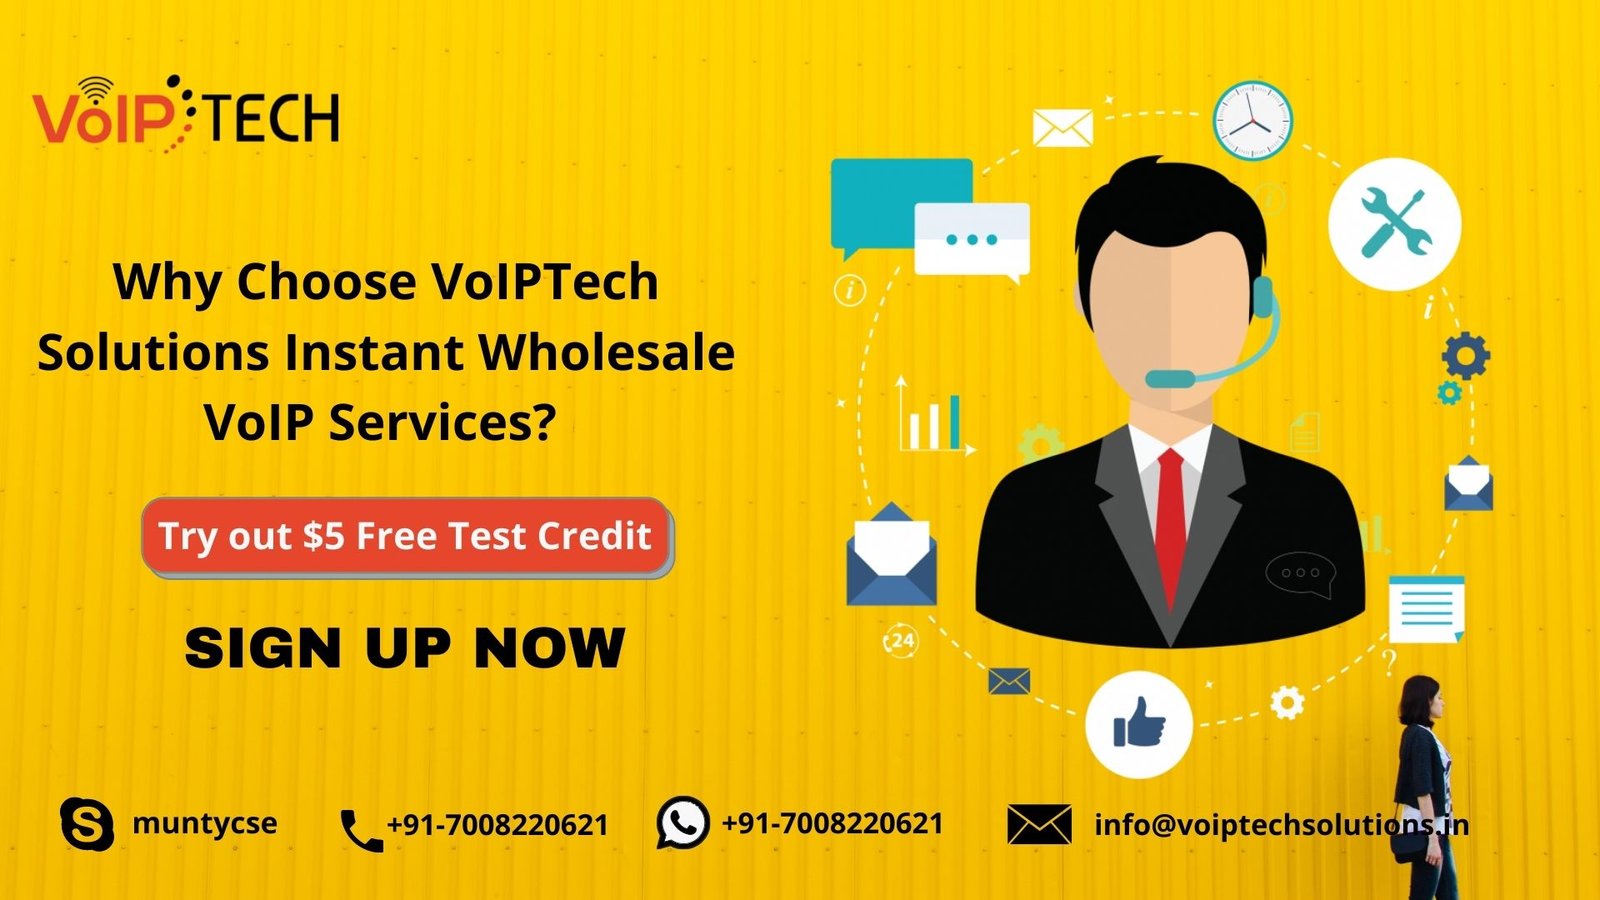 Instant VoIP Wholesale Service, Why Choose VoIPTech Solutions Instant Wholesale VoIP Services? , A-Z VoIP Termination Provider, Exploring The VoIP Technology from Business Point of view. Pros & Cons! ,VoIP Business, VoIP tech solutions, vici dialer, virtual number, Voip Providers, voip services in india, best sip provider, business voip providers, VoIP Phone Numbers, voip minutes provider, top voip providers, voip minutes, International VoIP Provider